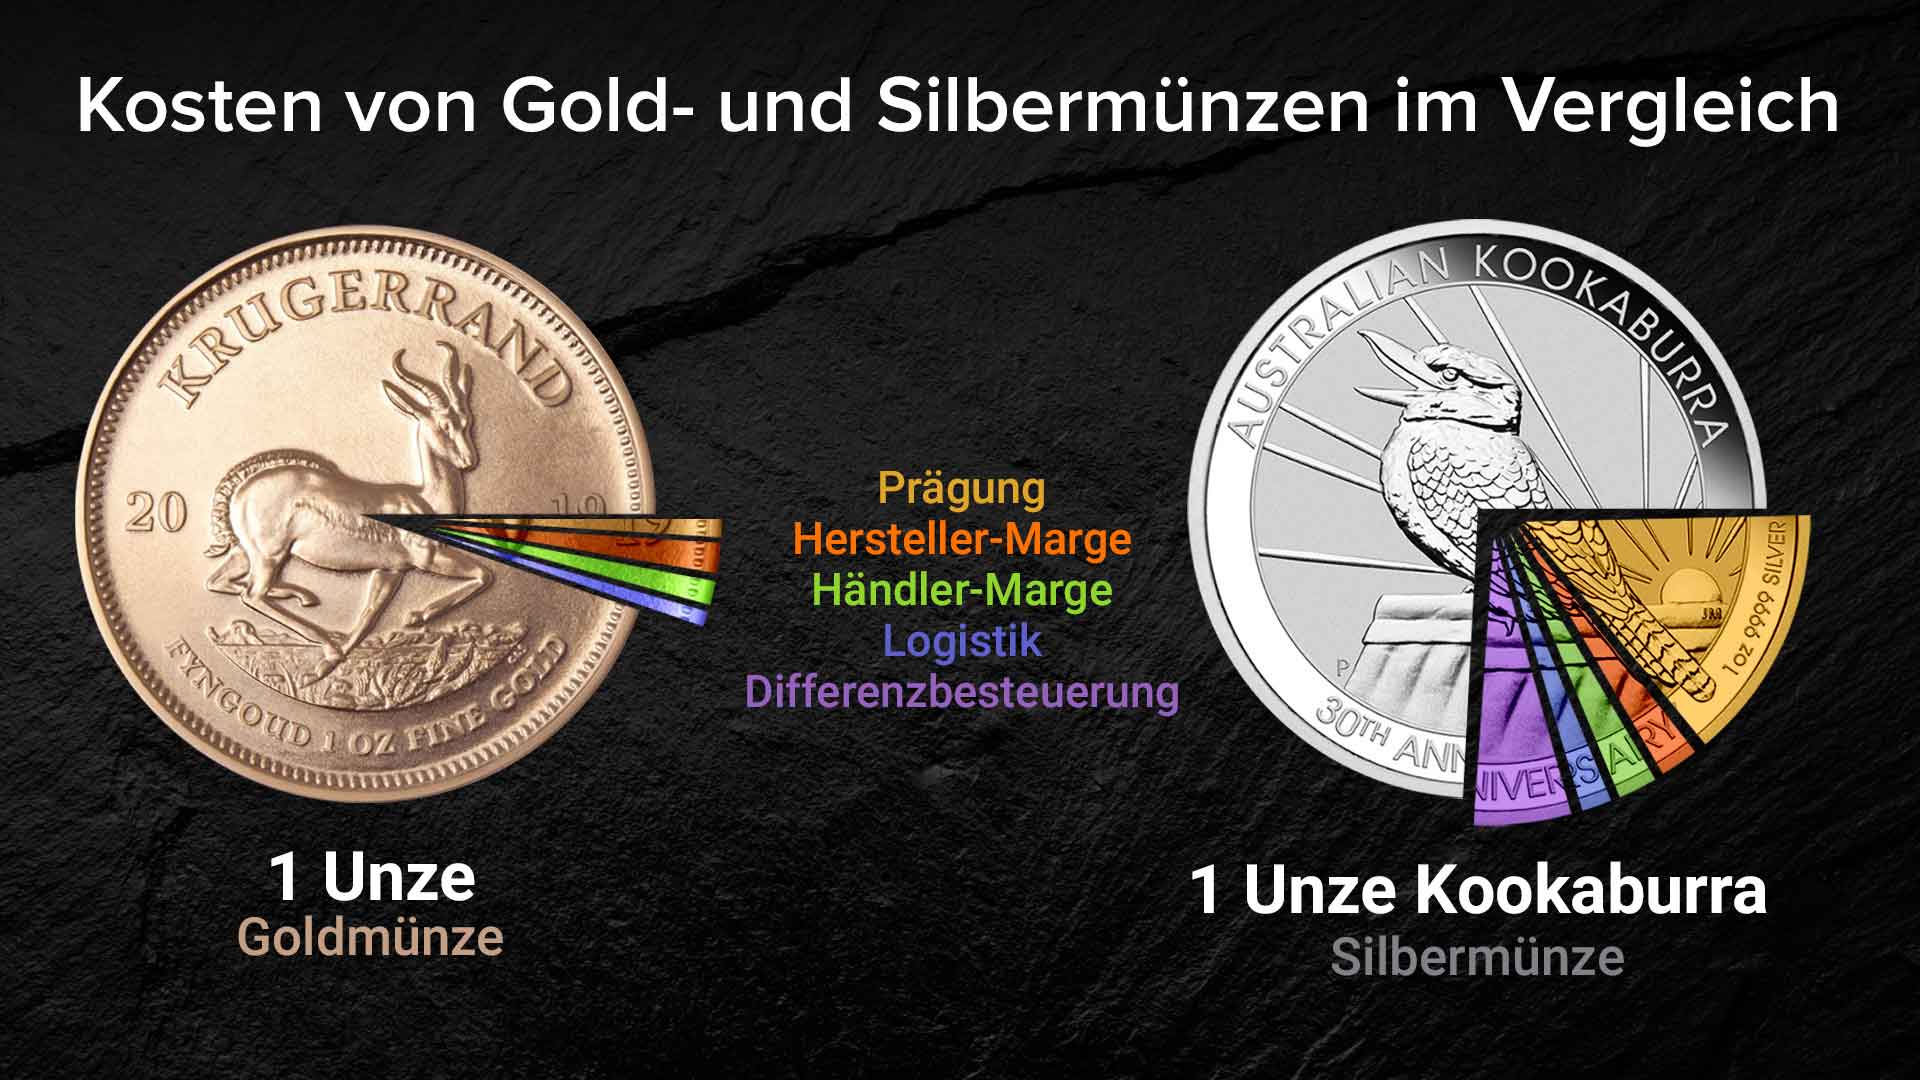 Cost of gold and silver coins in comparison